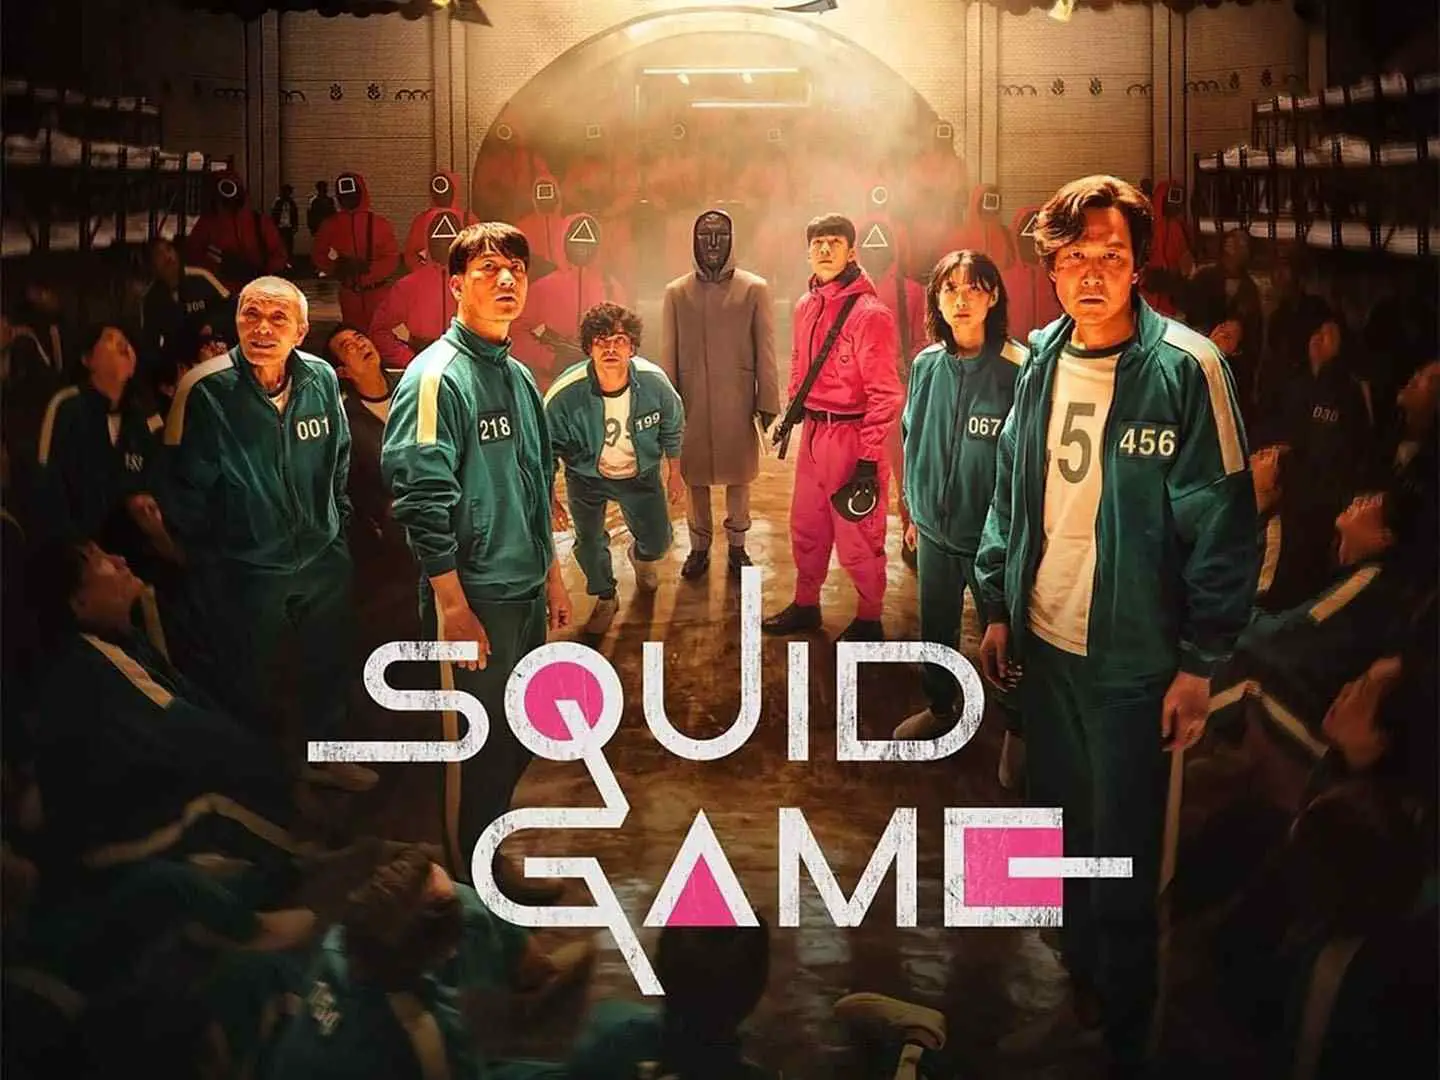 The South Korean show Squid Game has swept the world by storm. It's about a group of people having trouble making ends meet.